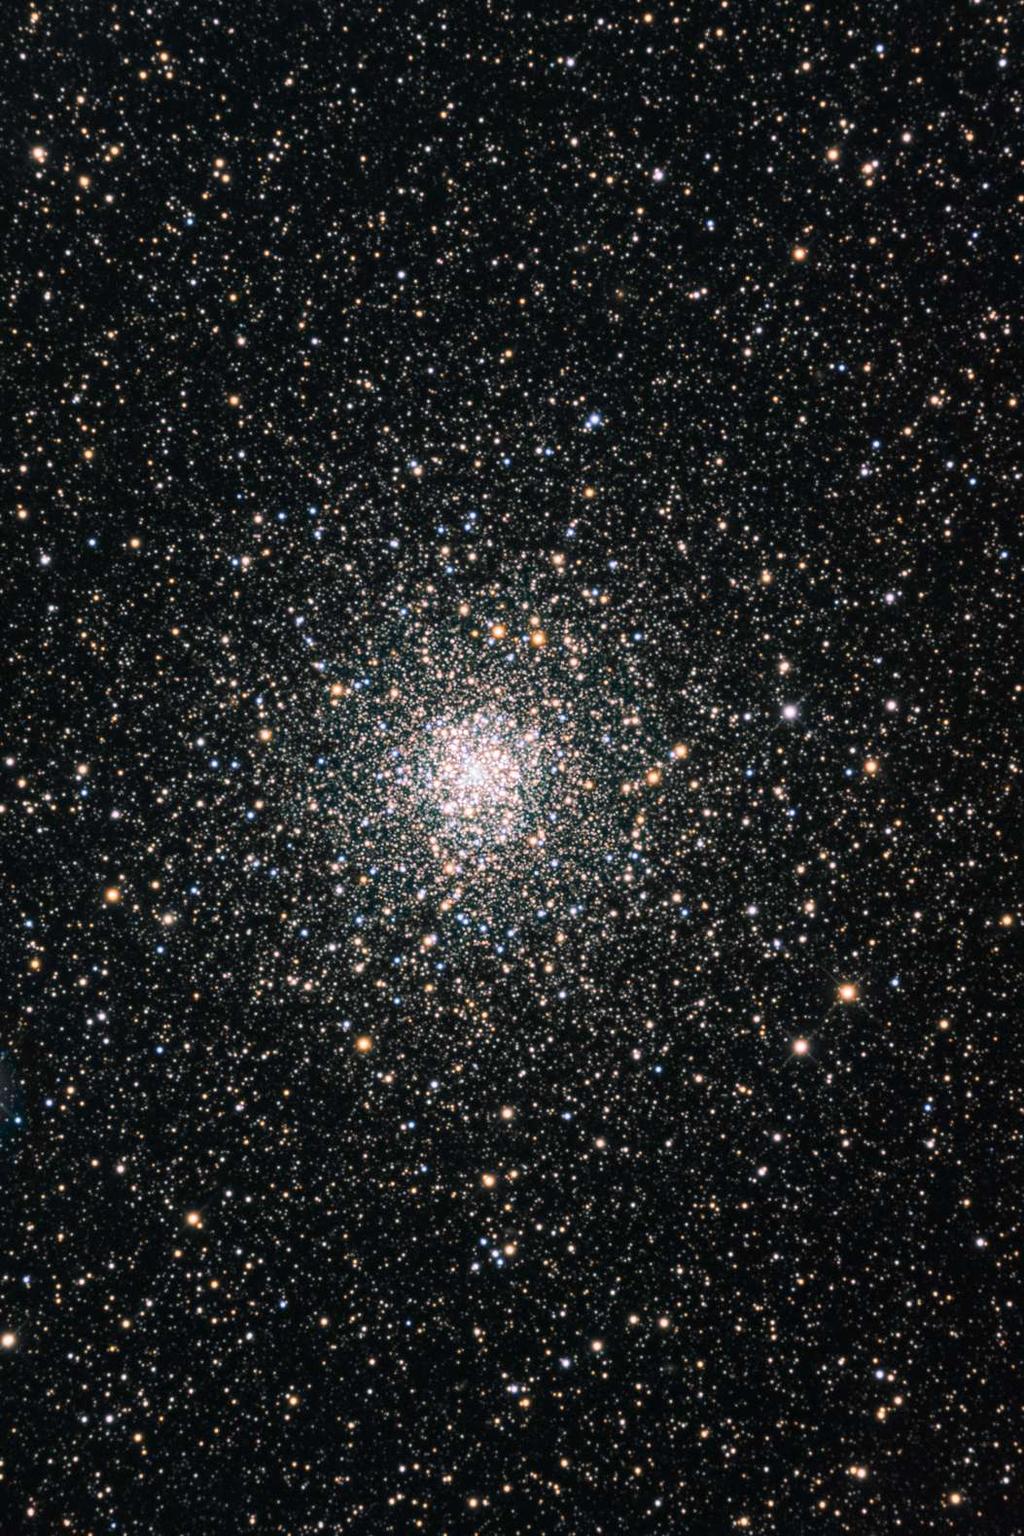 The white dwarfs in globular clusters can be used to